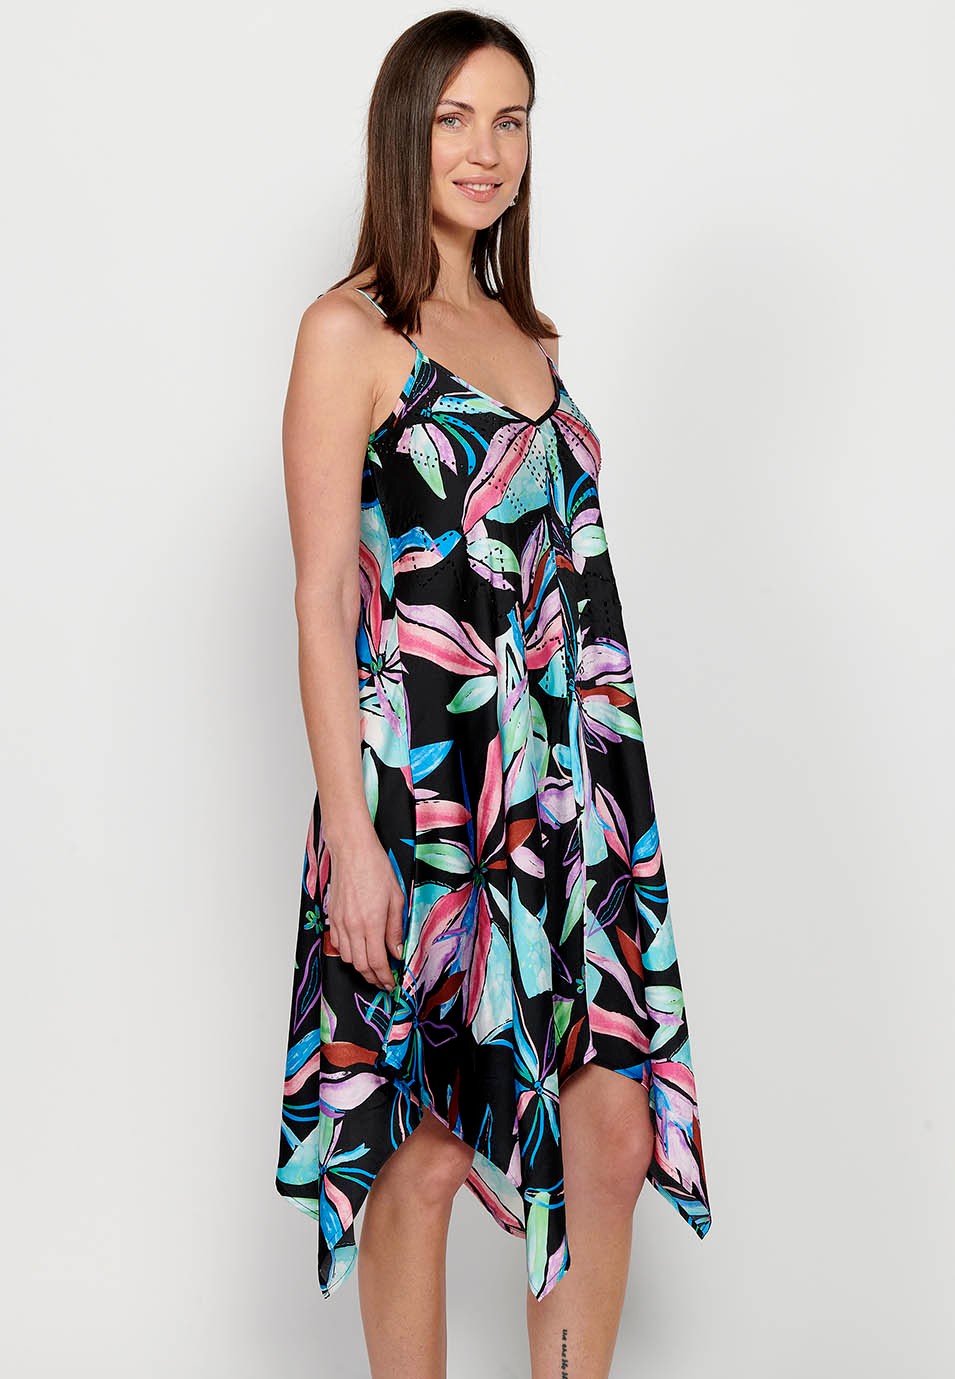 Midi dress with adjustable straps with sparkling neckline and long peaked finish with Multicolor floral print for Women 9